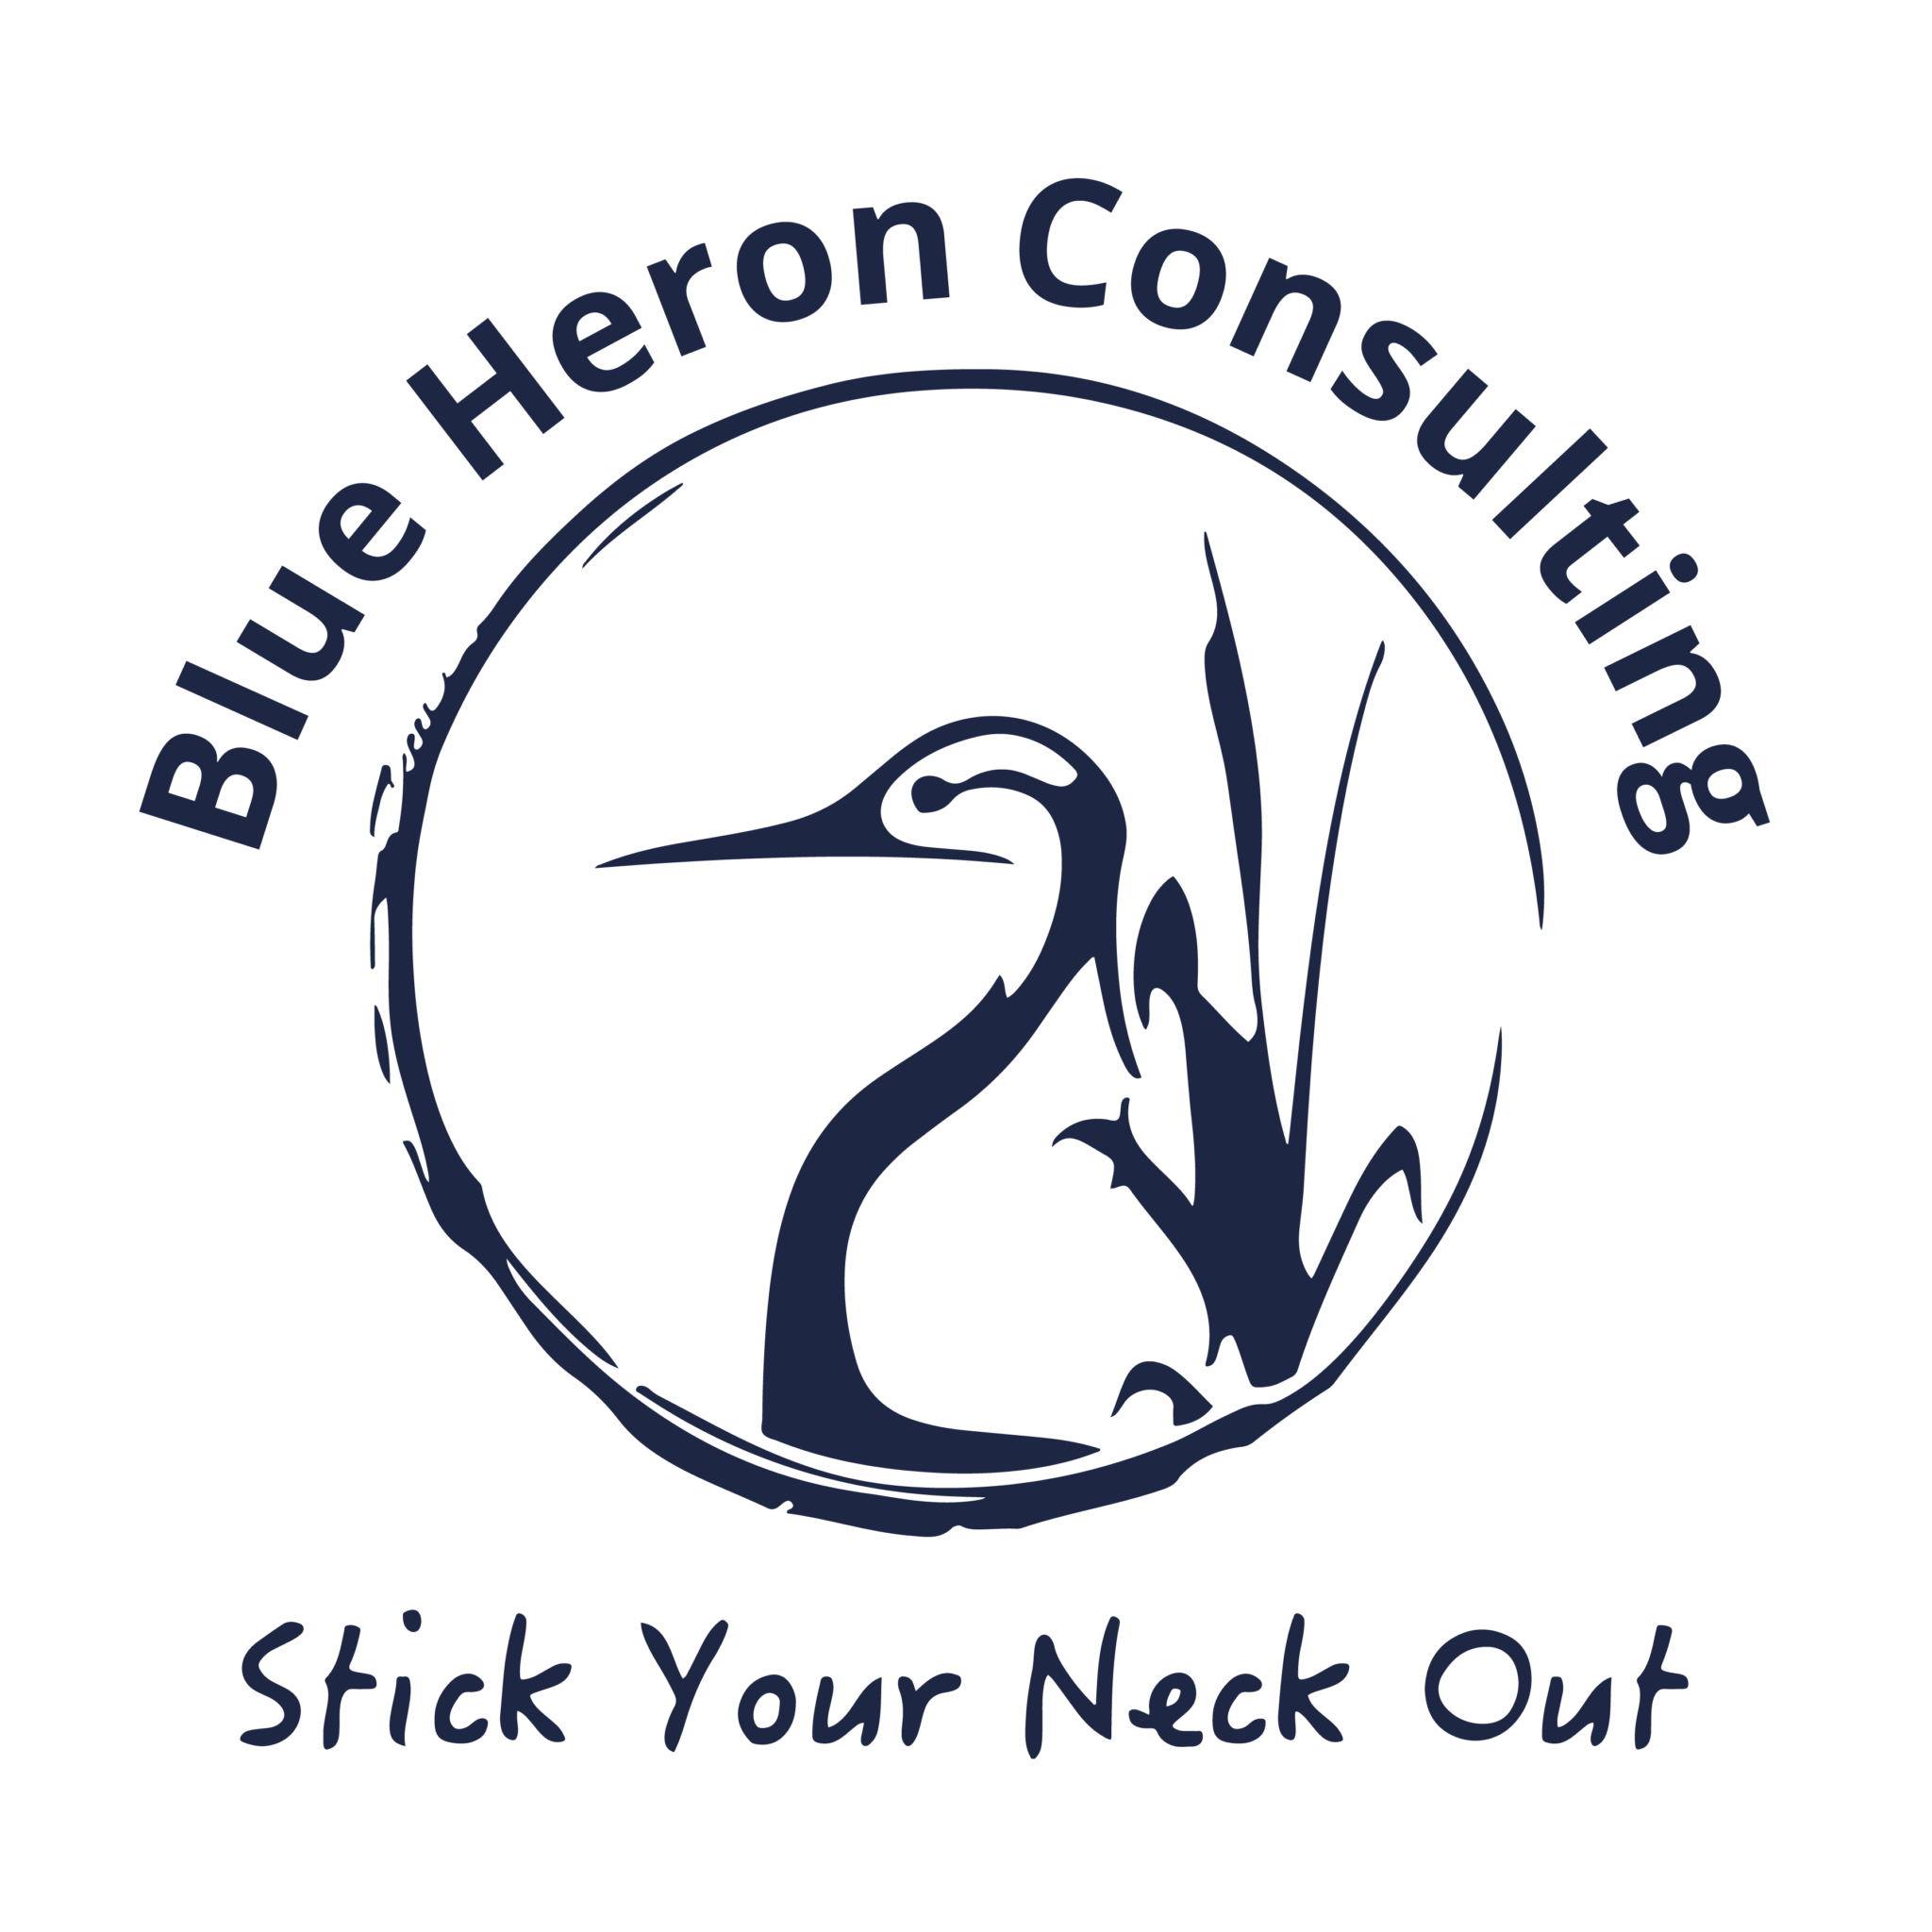 Blue Heron Consulting